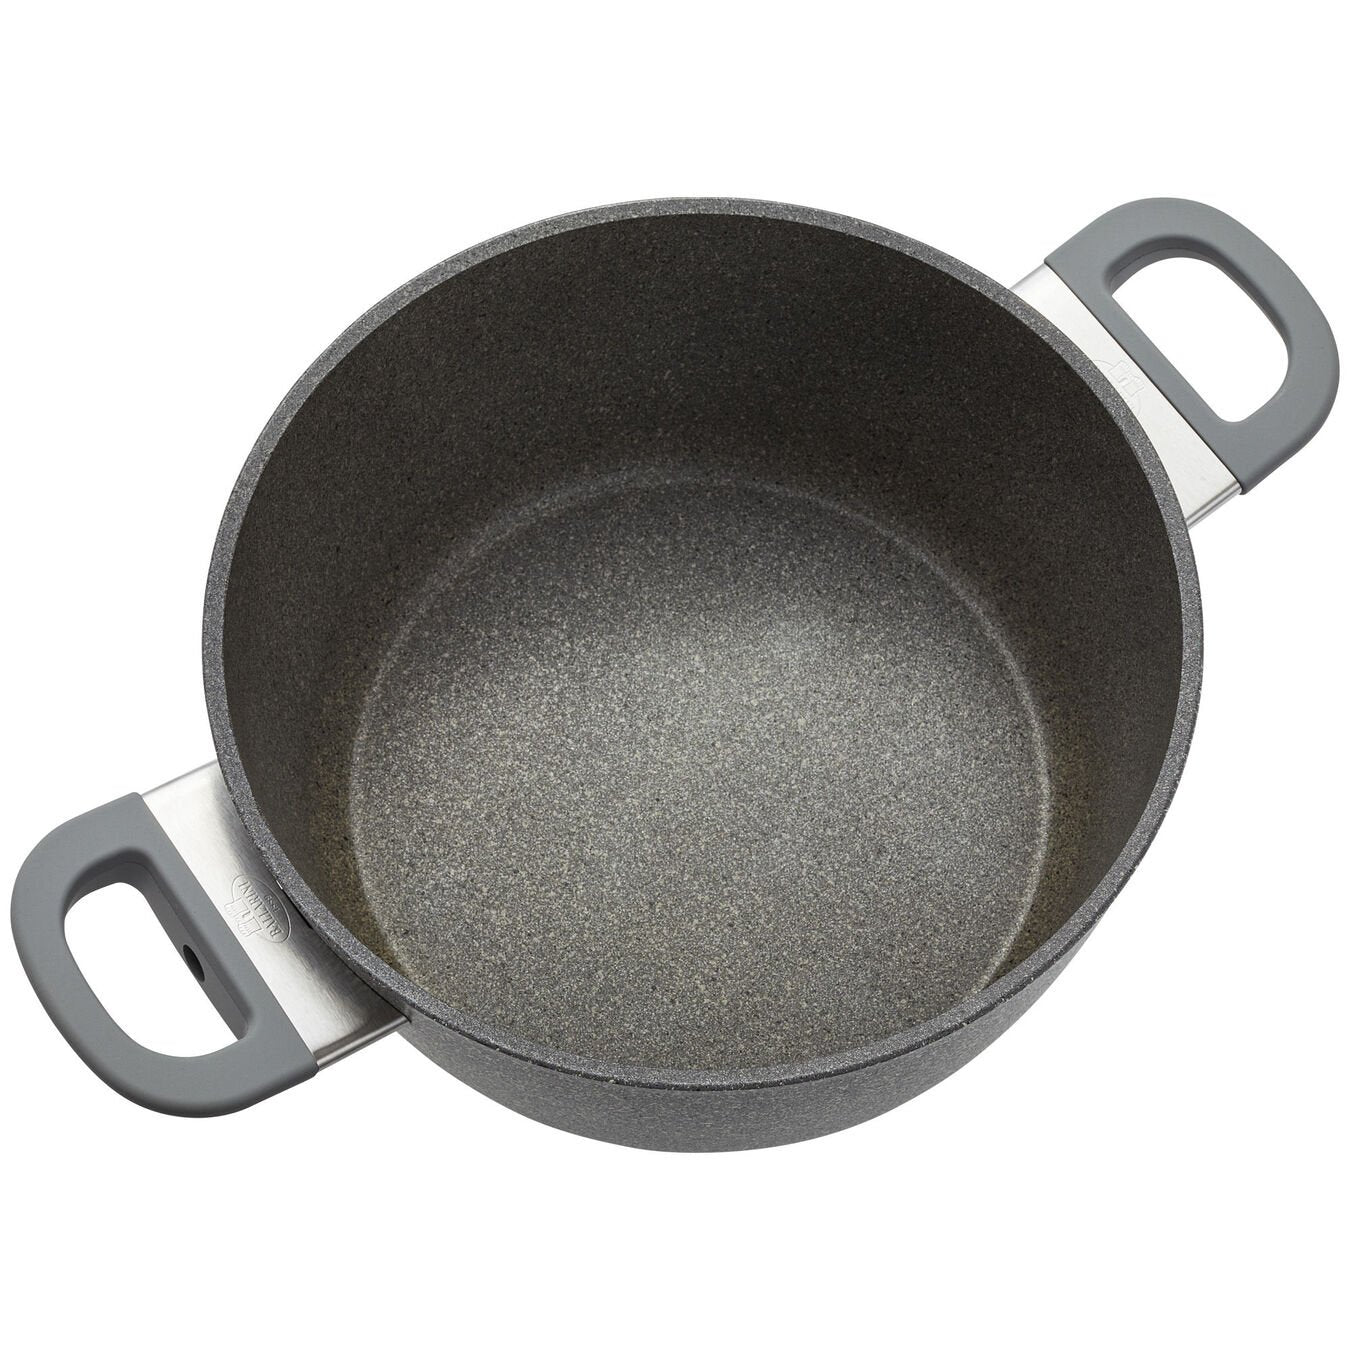 top view of dutch oven on white background